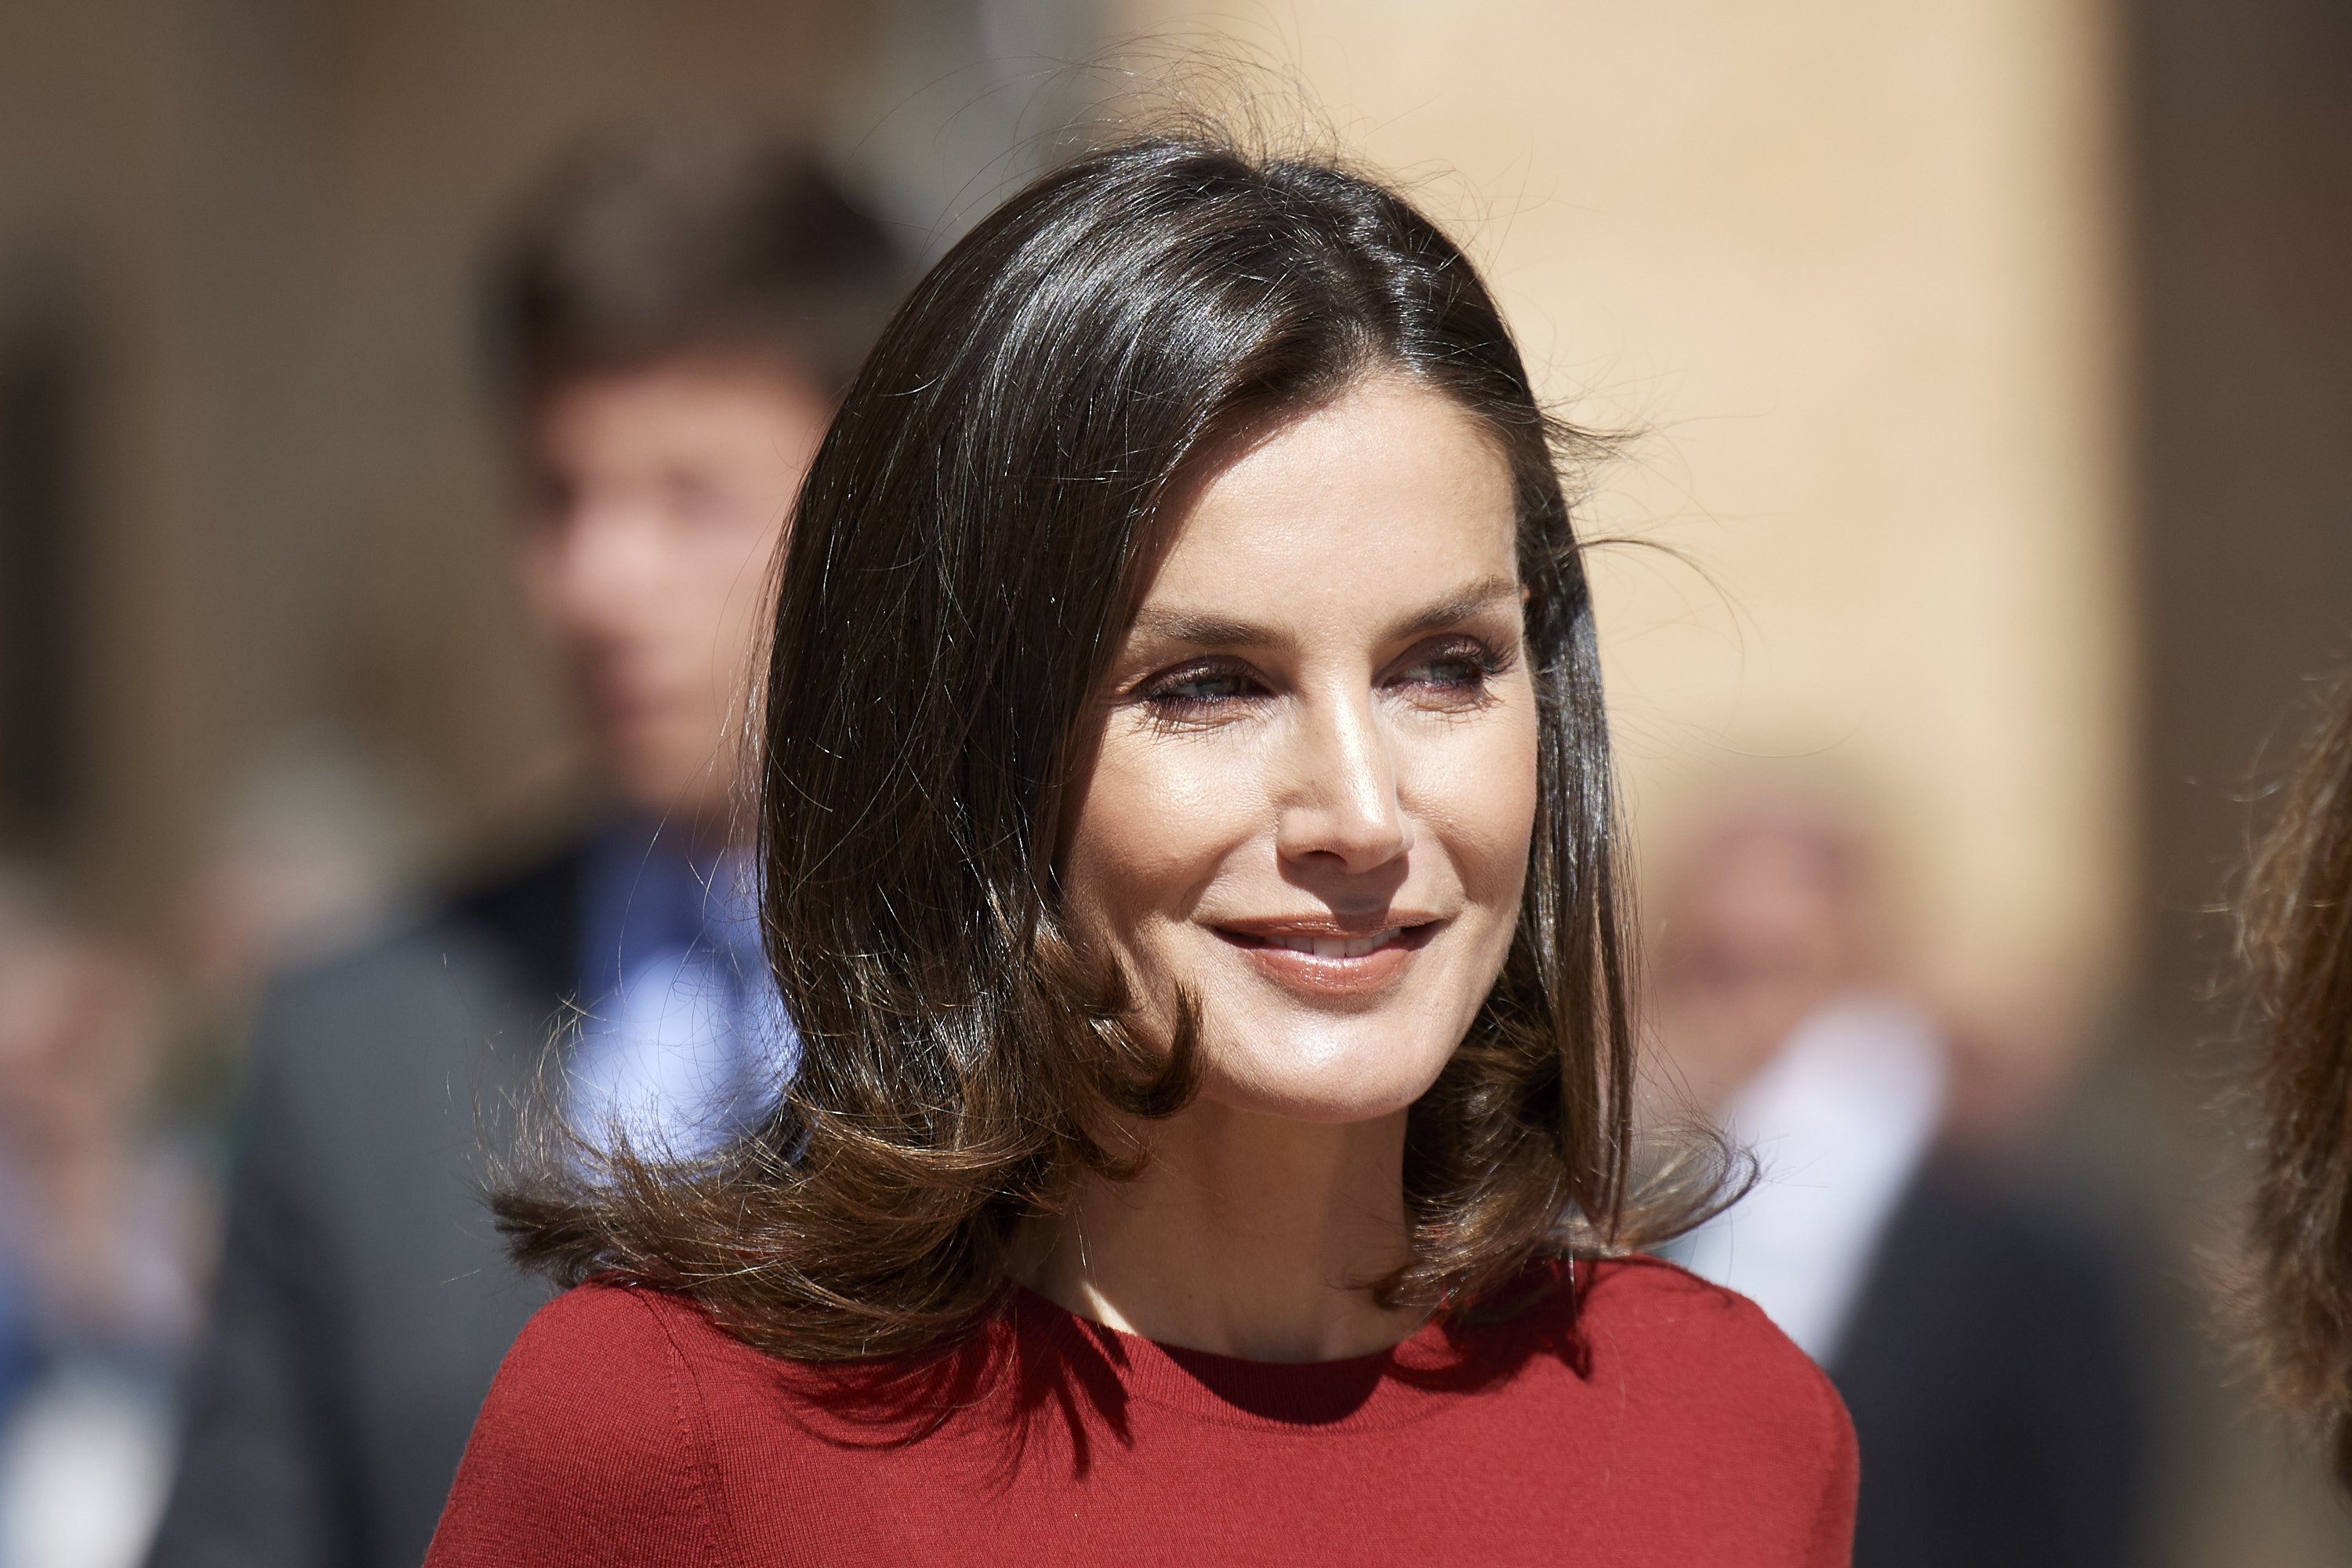 Queen Letizia Of Spain attends the closure Of Journalist's Seminar on June 12, 2019 | Photo: Getty Images